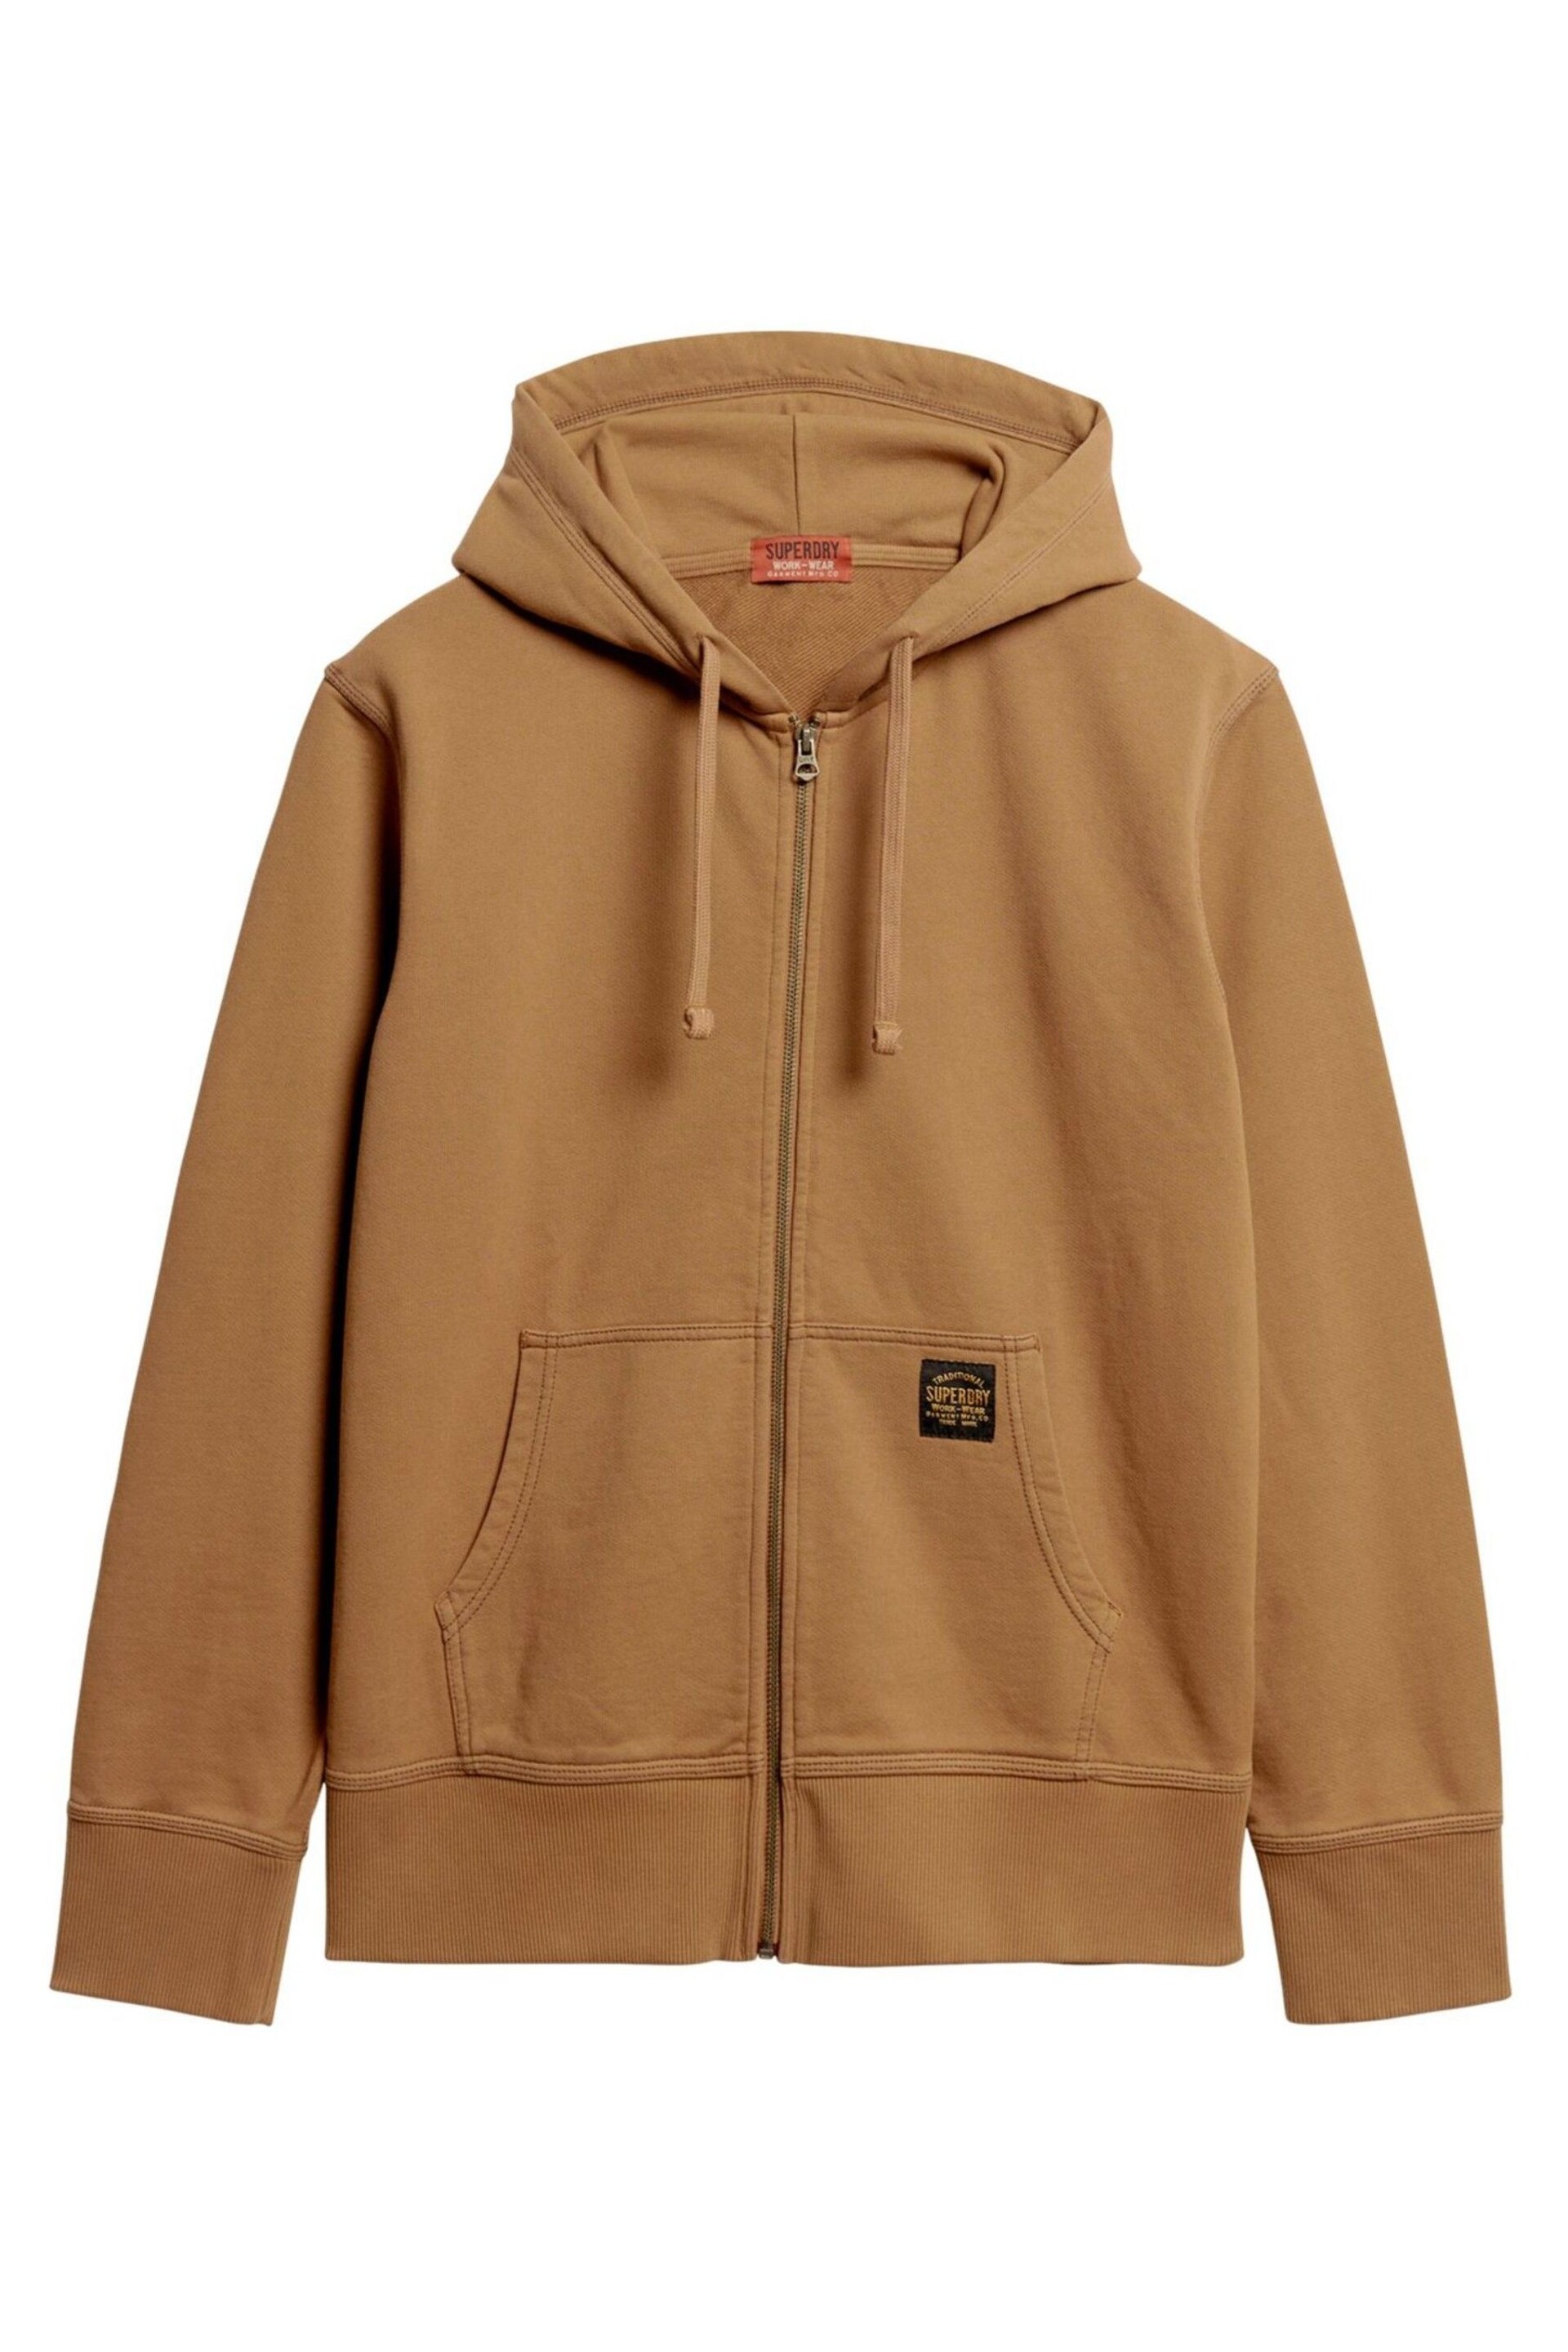 Superdry Brown Contrast Stitch Relax Zip Hoodie - Image 4 of 4